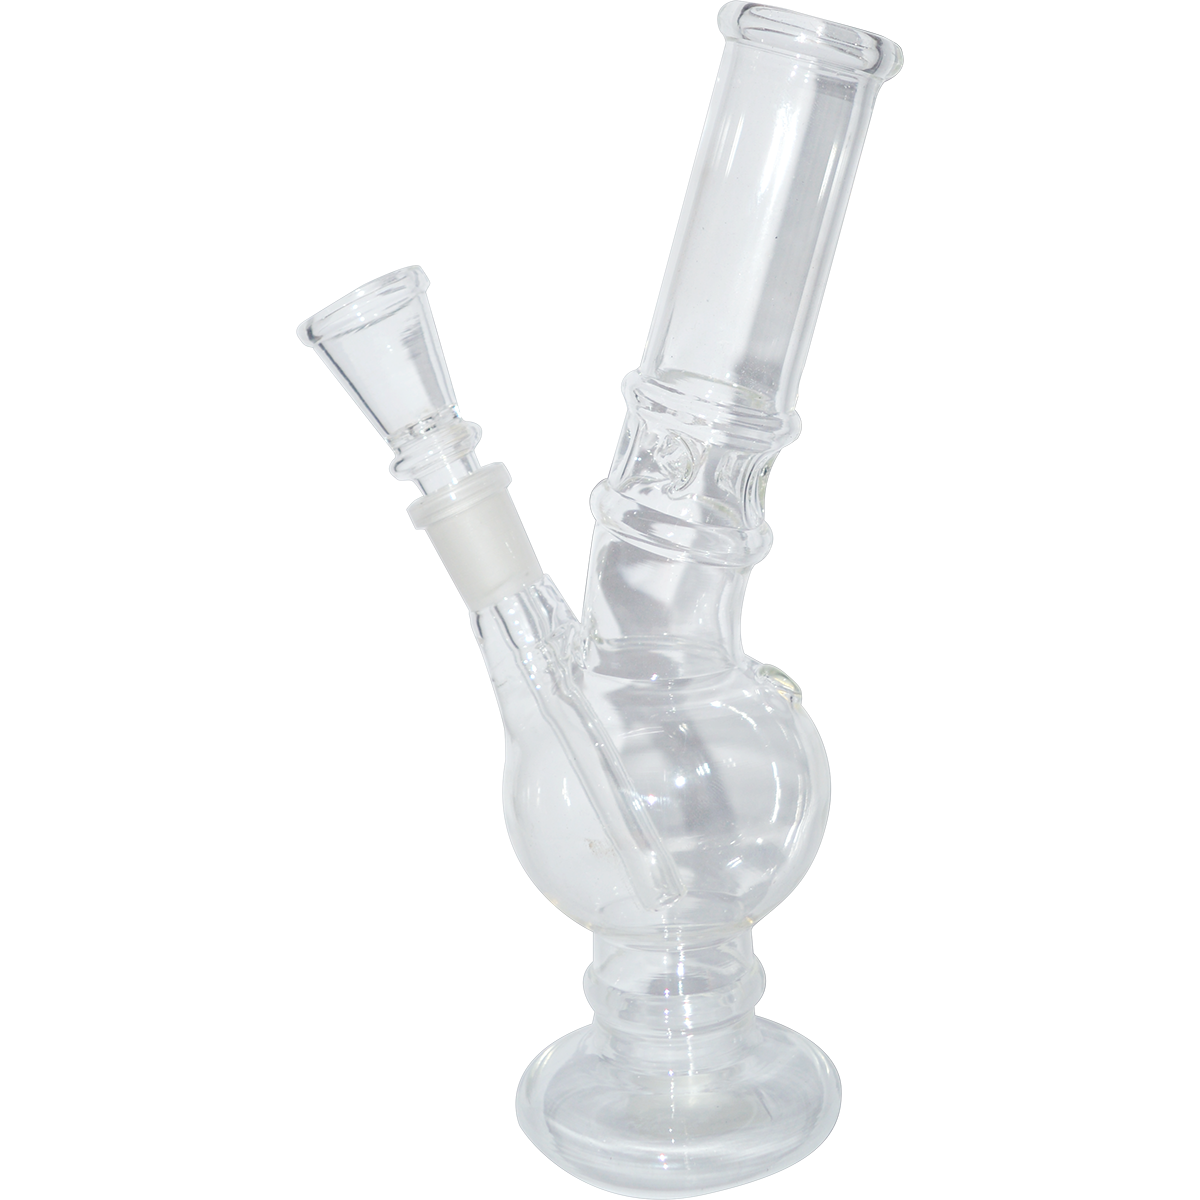 8 Inch Single Bowl Glass Ice Bong (Transparent)